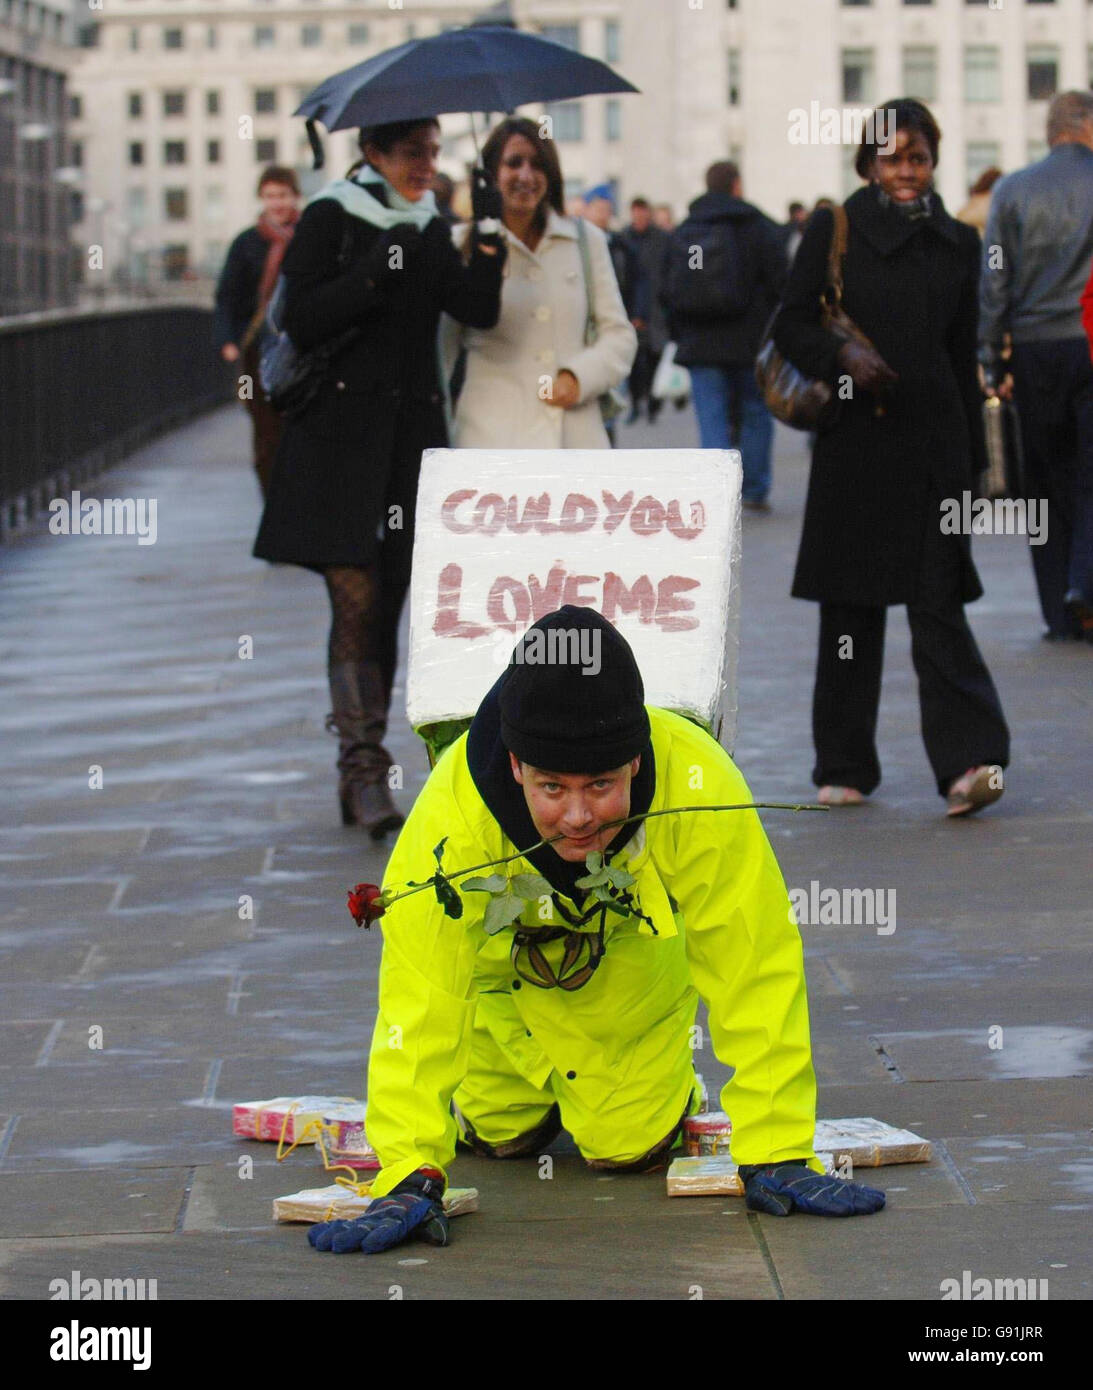 Artist Mark McGowan crawls over London Bridge Friday December 2, 2005, with boxes of chocolates strapped to his hands and feet and a rose between his teeth. He was launching his attempt to crawl 60 miles from London to Canterbury starting Boxing Day: he says he is doing it for those people who spend Christmas alone. PRESS ASSOCIATION Photo. Photo credit should read: Fiona Hanson/PA. Stock Photo